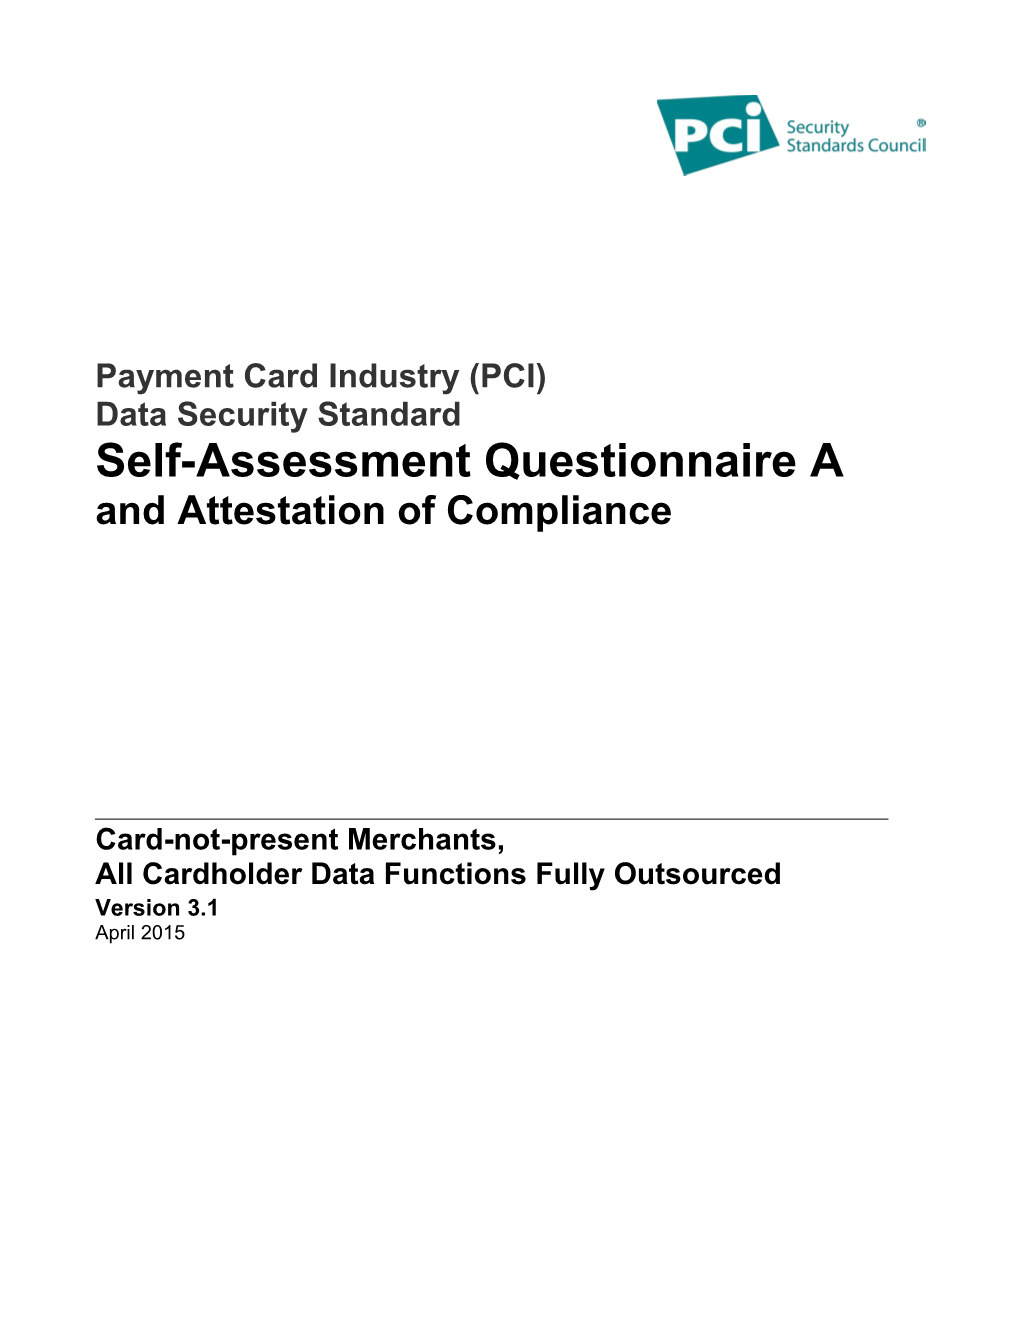 Payment Card Industry (PCI) Data Security Standard Self-Assessment Questionnaire a And